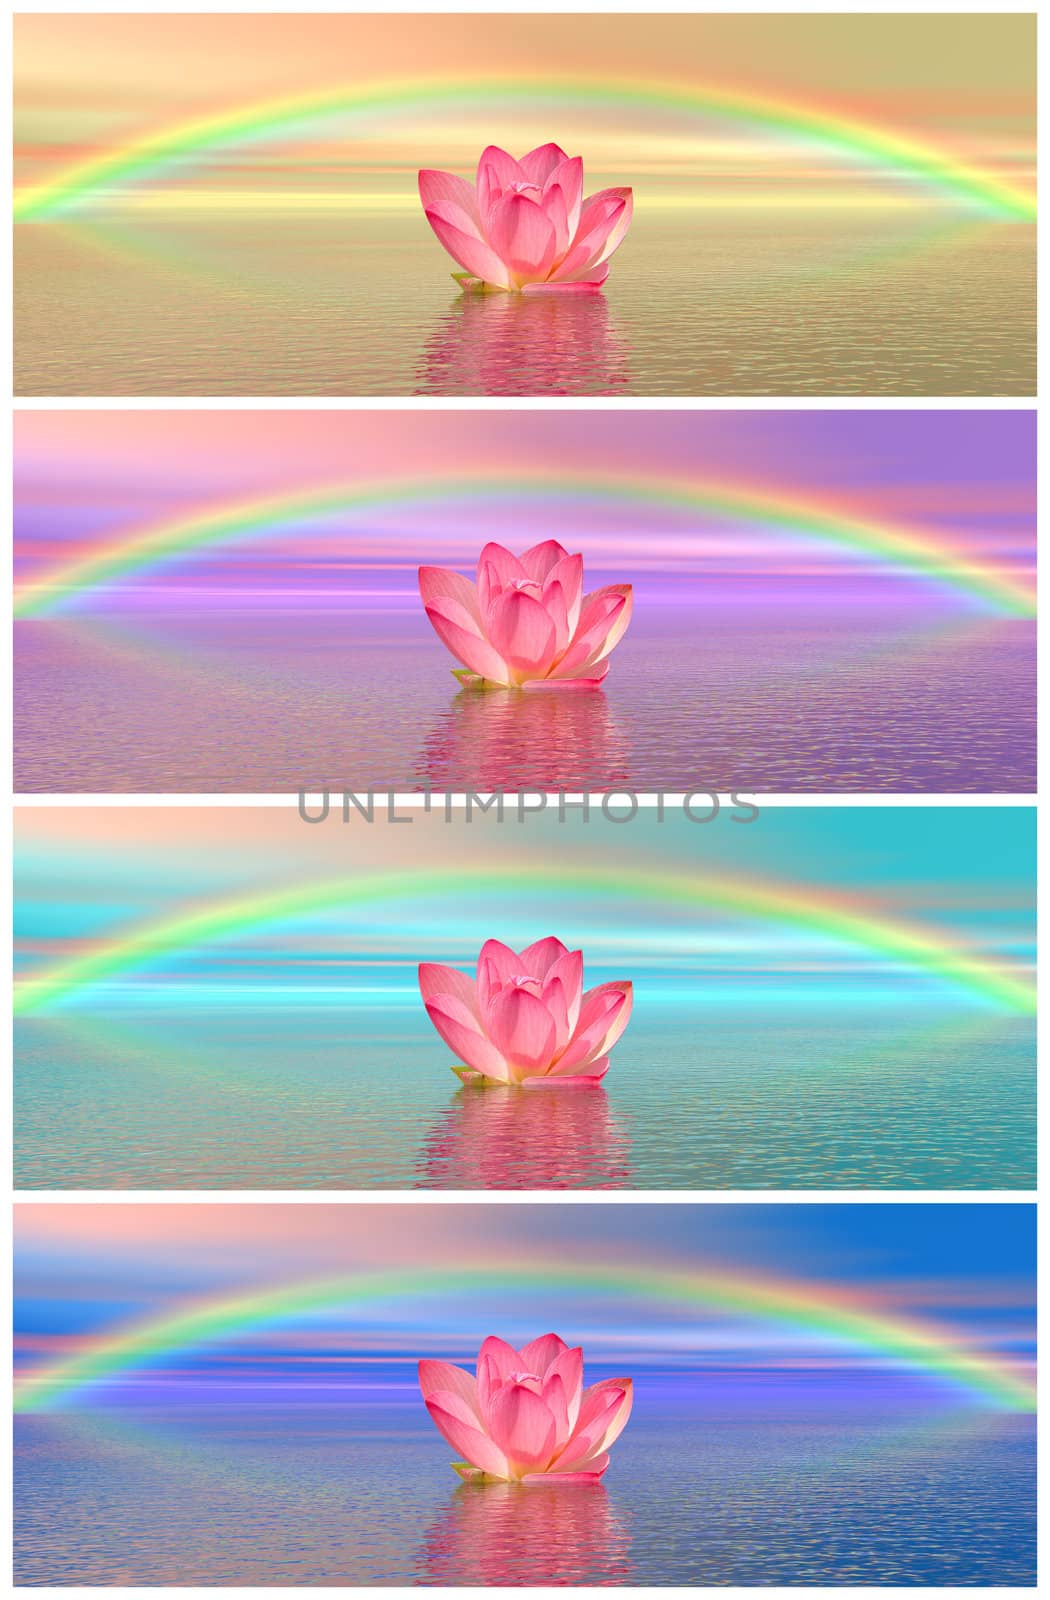 Set of different colors of pink lily flowers on water and under rainbow